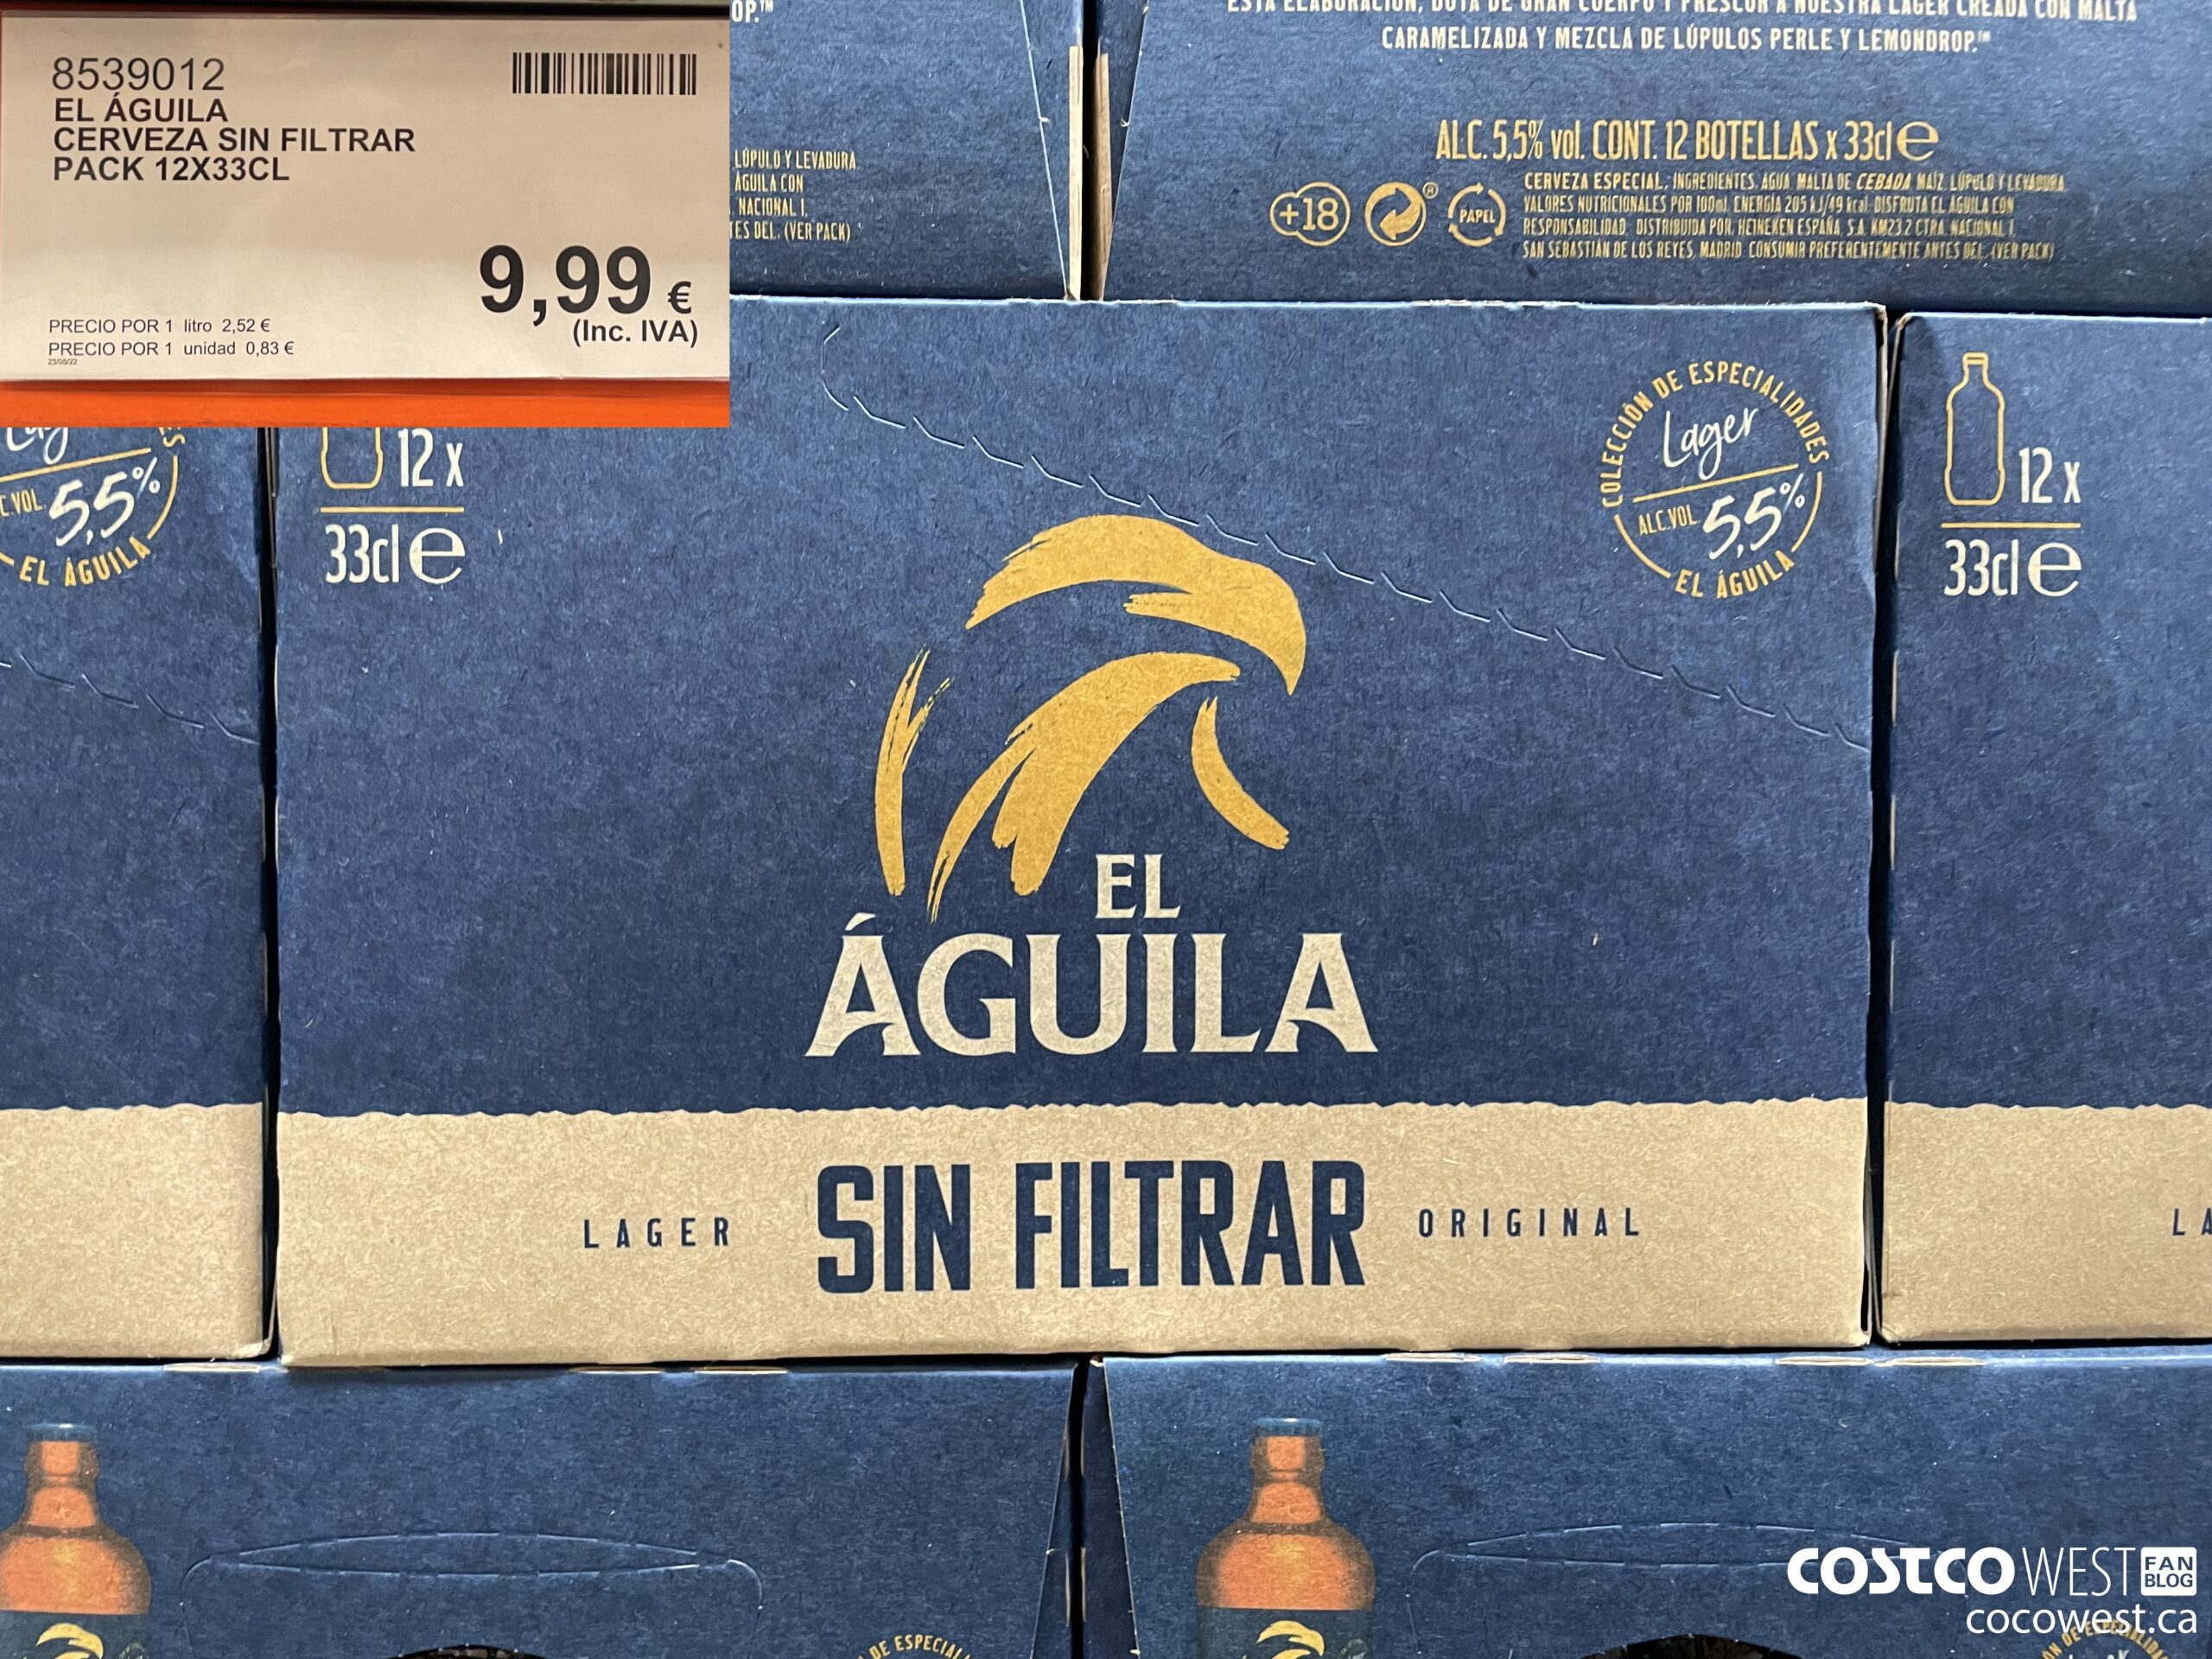 https://west.cocowest1.ca/2022/08/EL_AGUILA_CERVEZA_SIN_FILTRAR_PACK_12_X_33_CL_20220813_96778-scaled.jpg